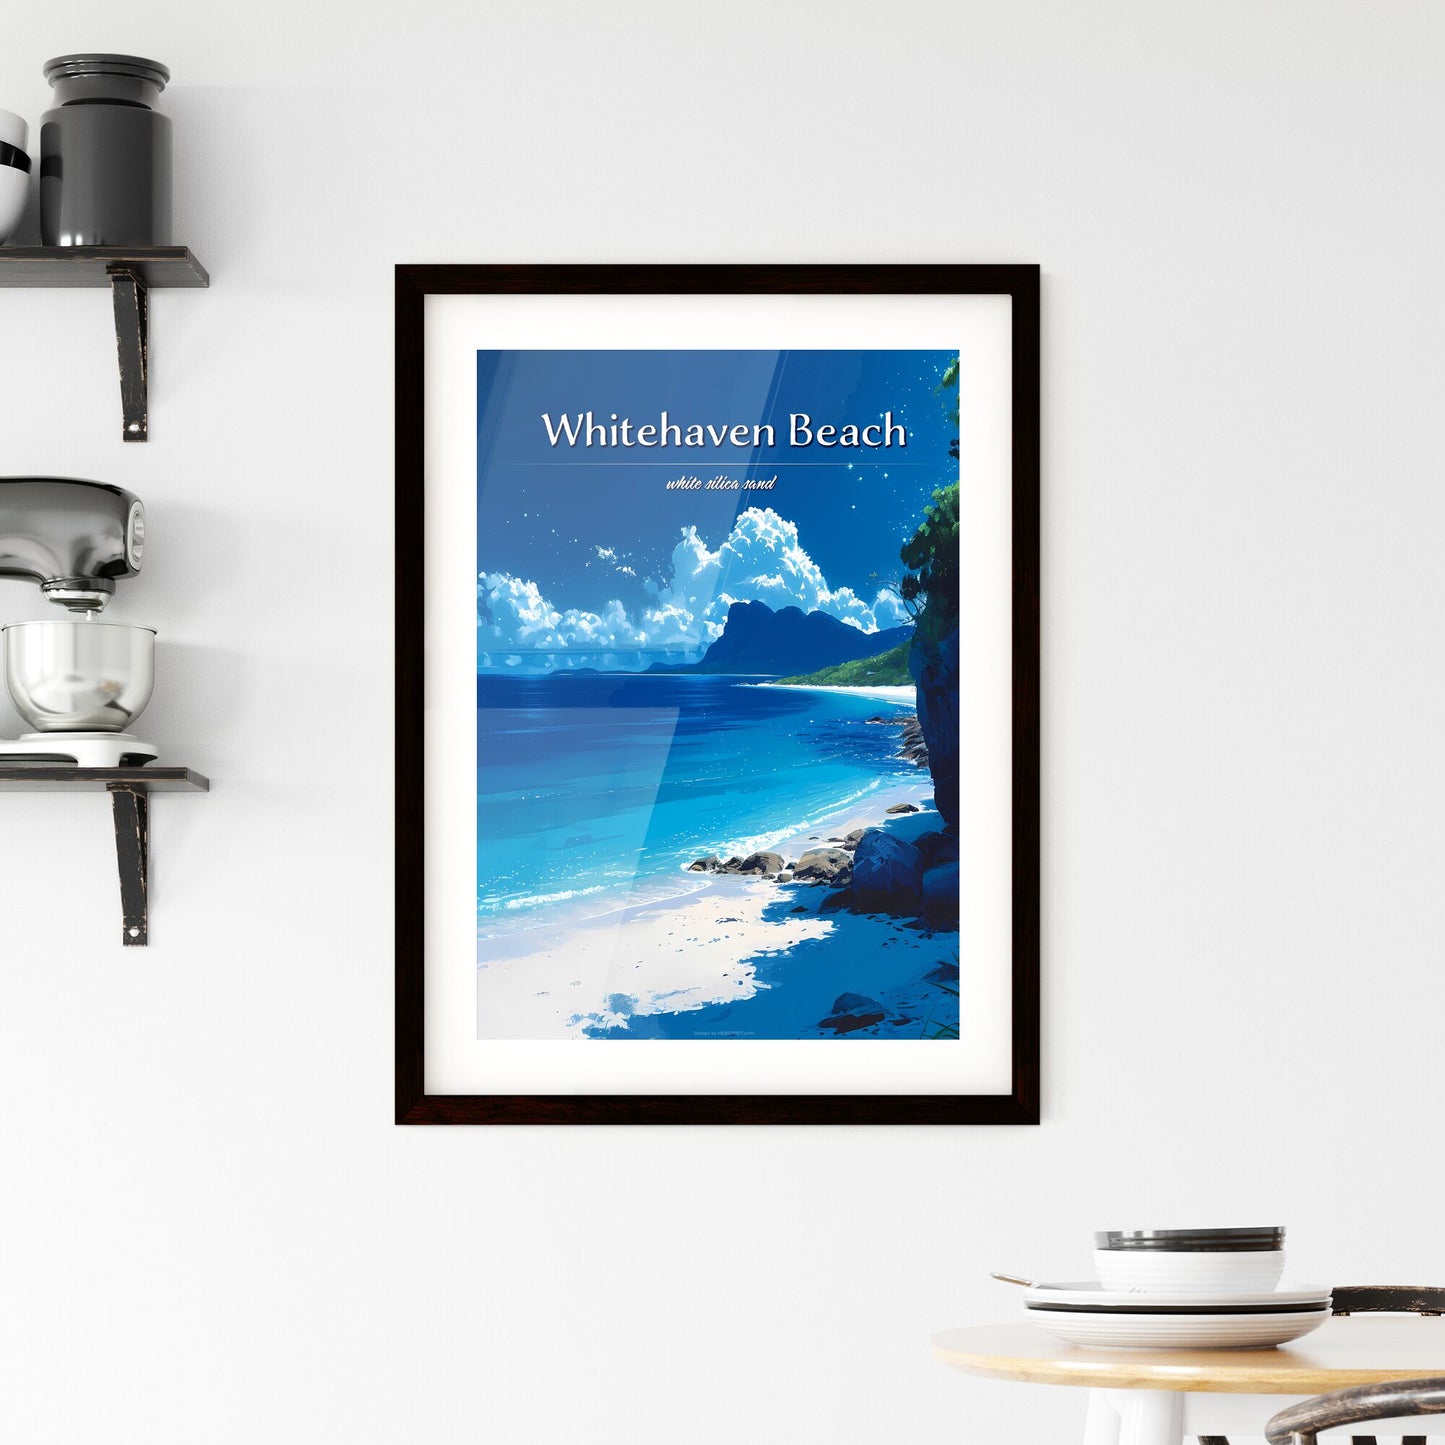 Whitehaven Beach - Art print of a landscape of a lake with houses and mountains Default Title